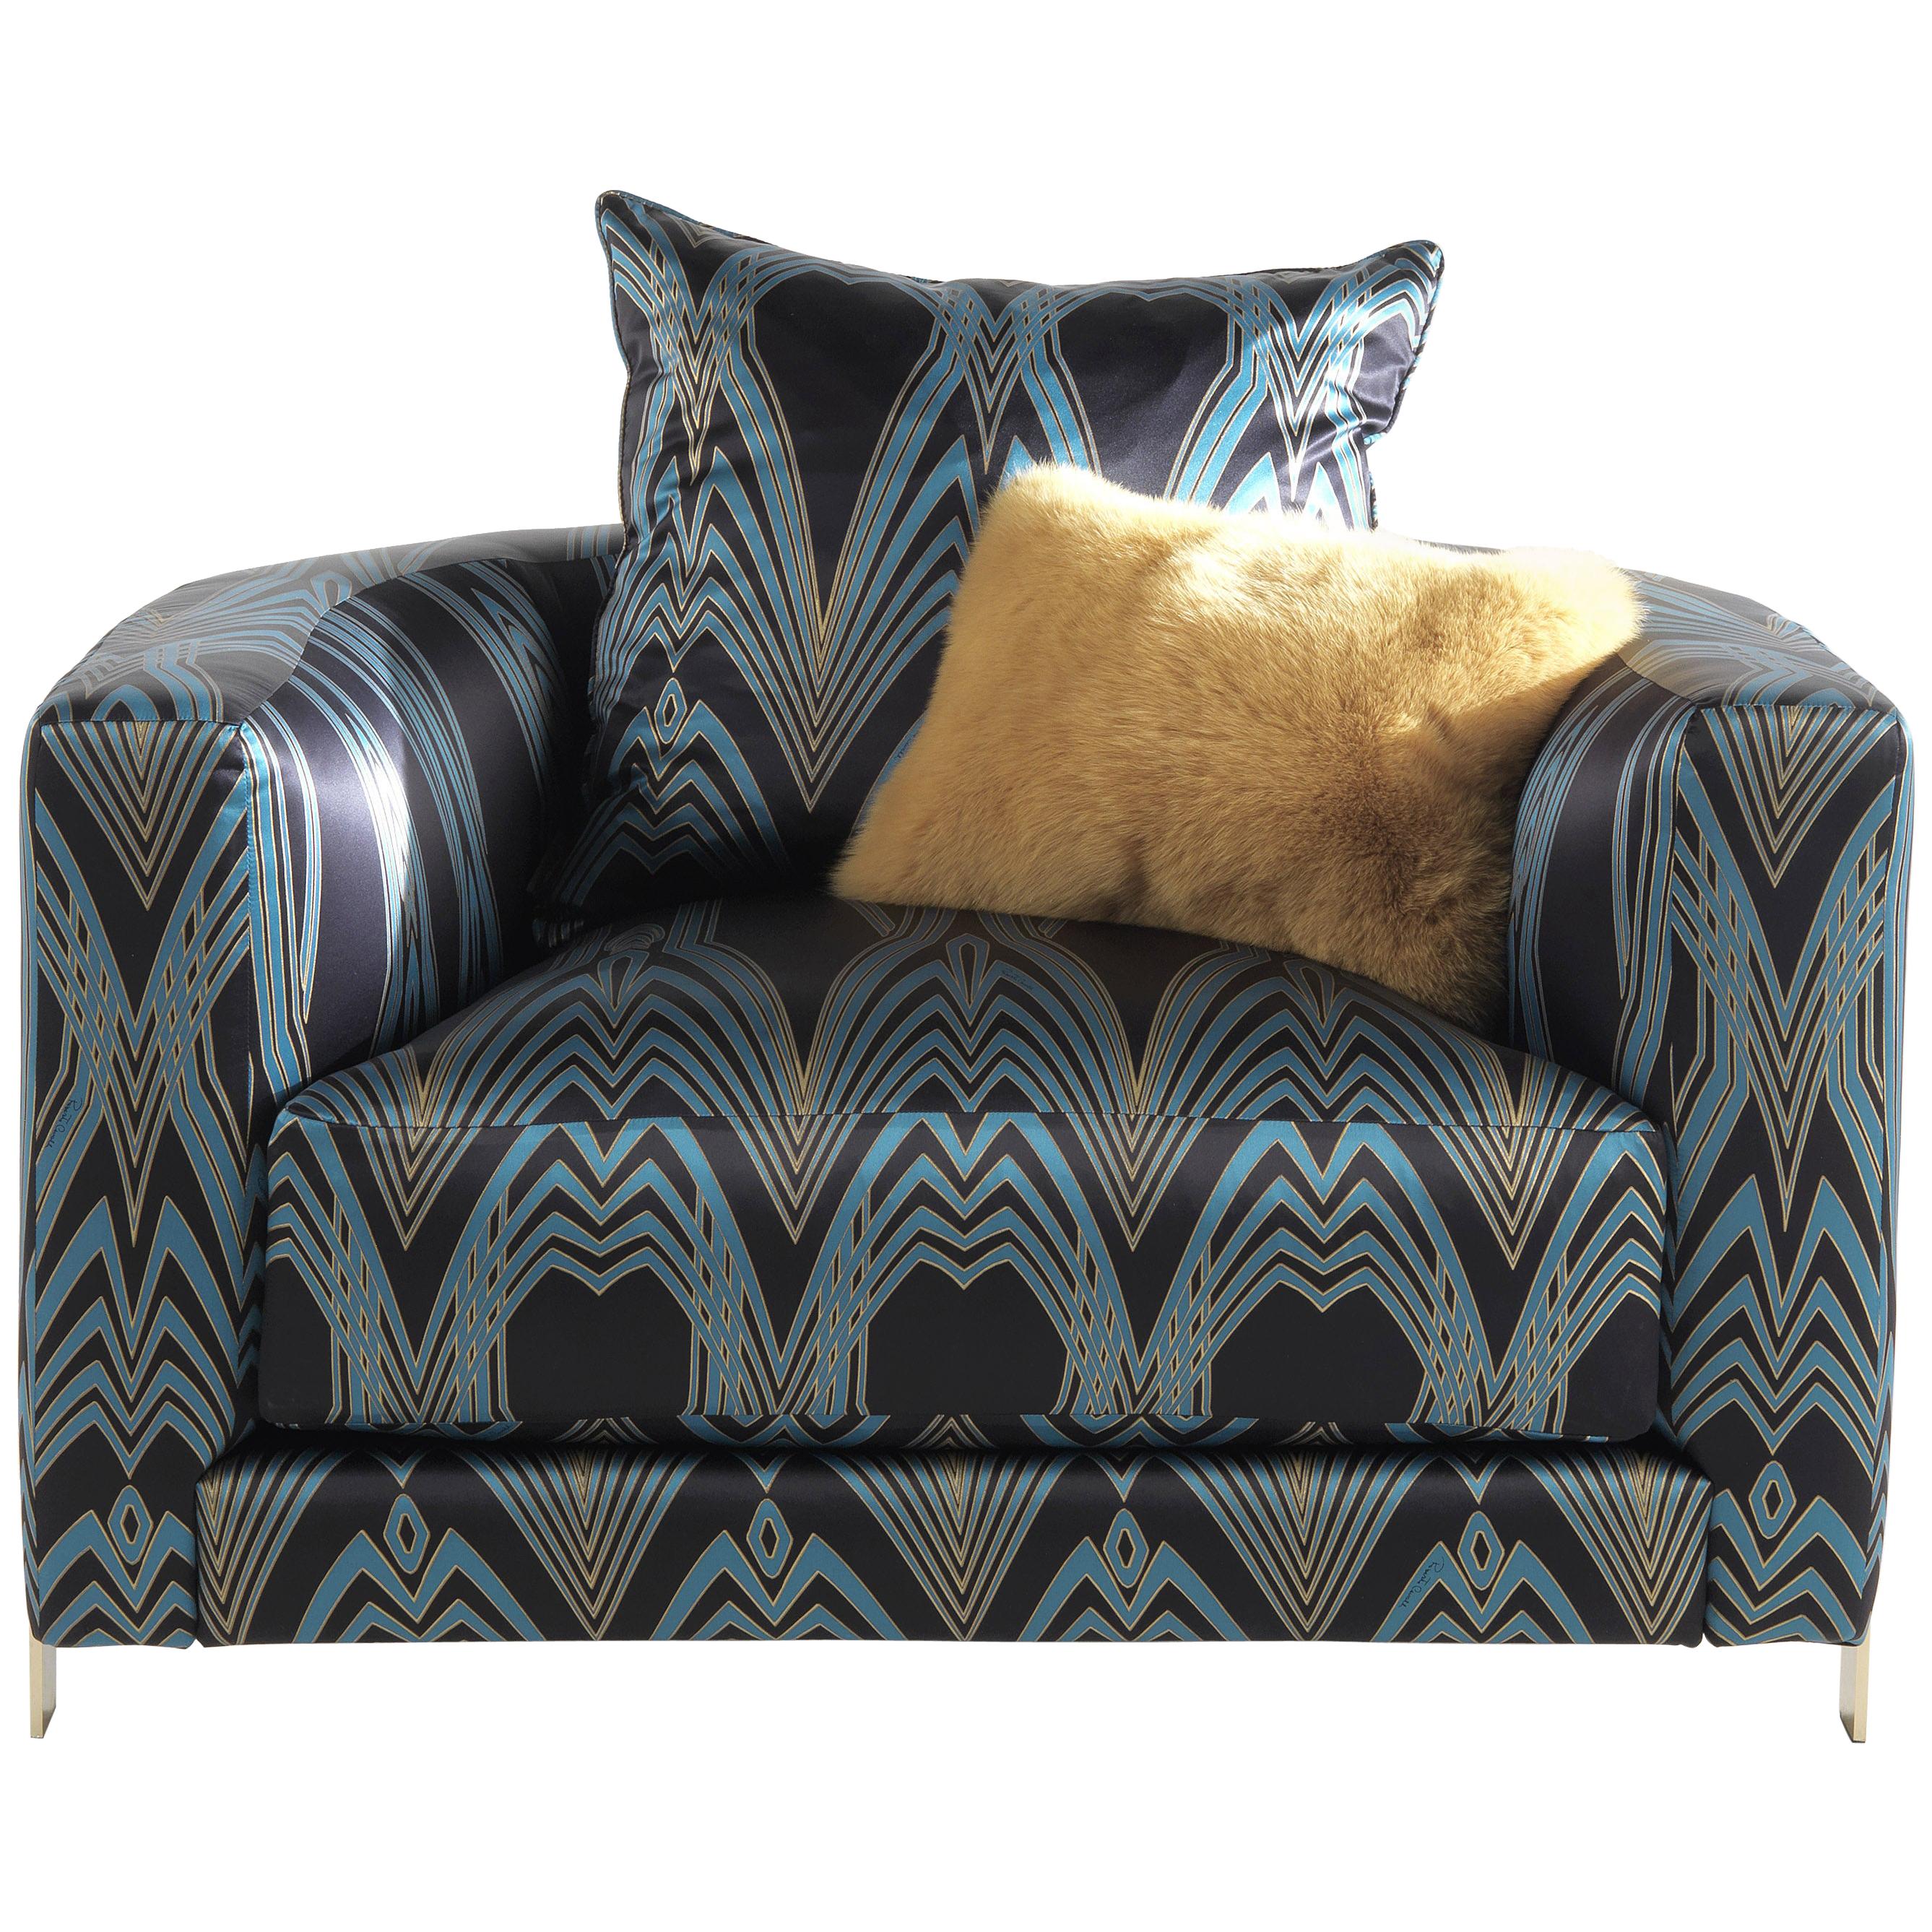 21st Century Manhattan Armchair in Fabric by Roberto Cavalli Home Interiors For Sale